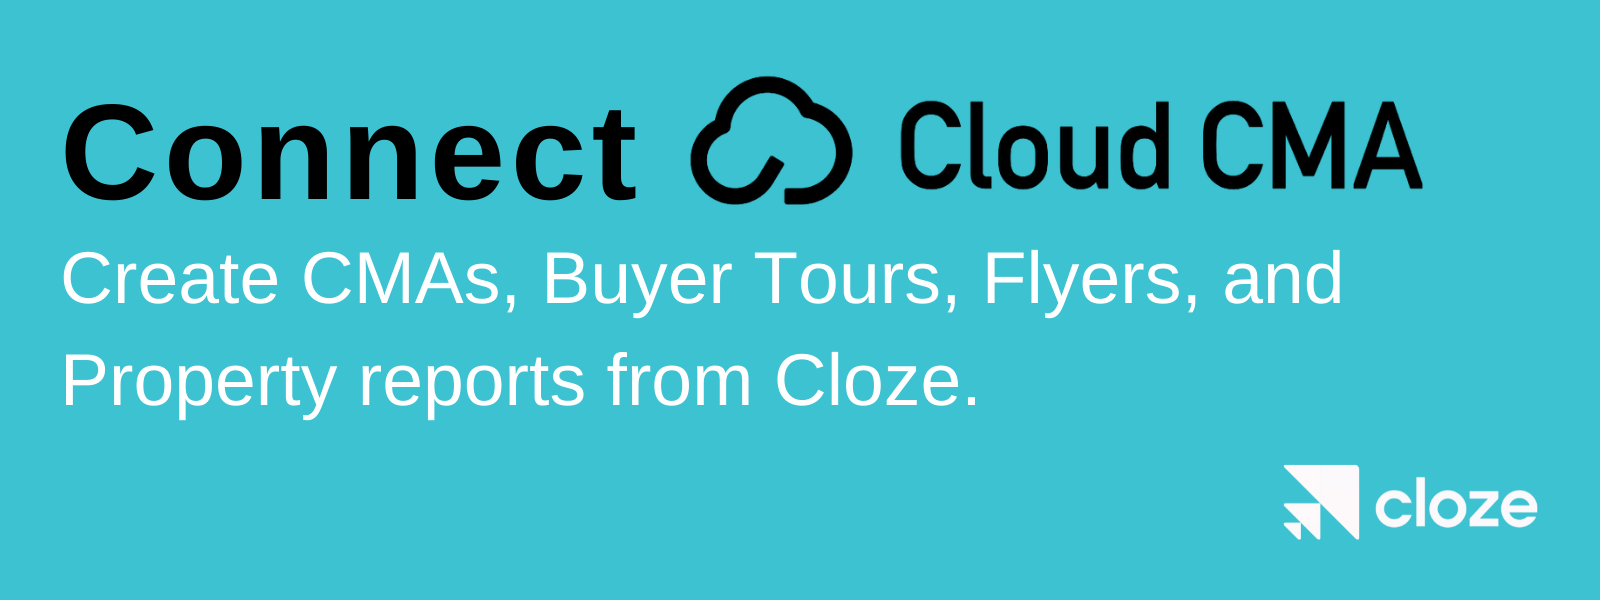 Connect Cloud CMA to Cloze. Create CMAs, Buyer Tours, Flyers, and Property reports from Cloze.